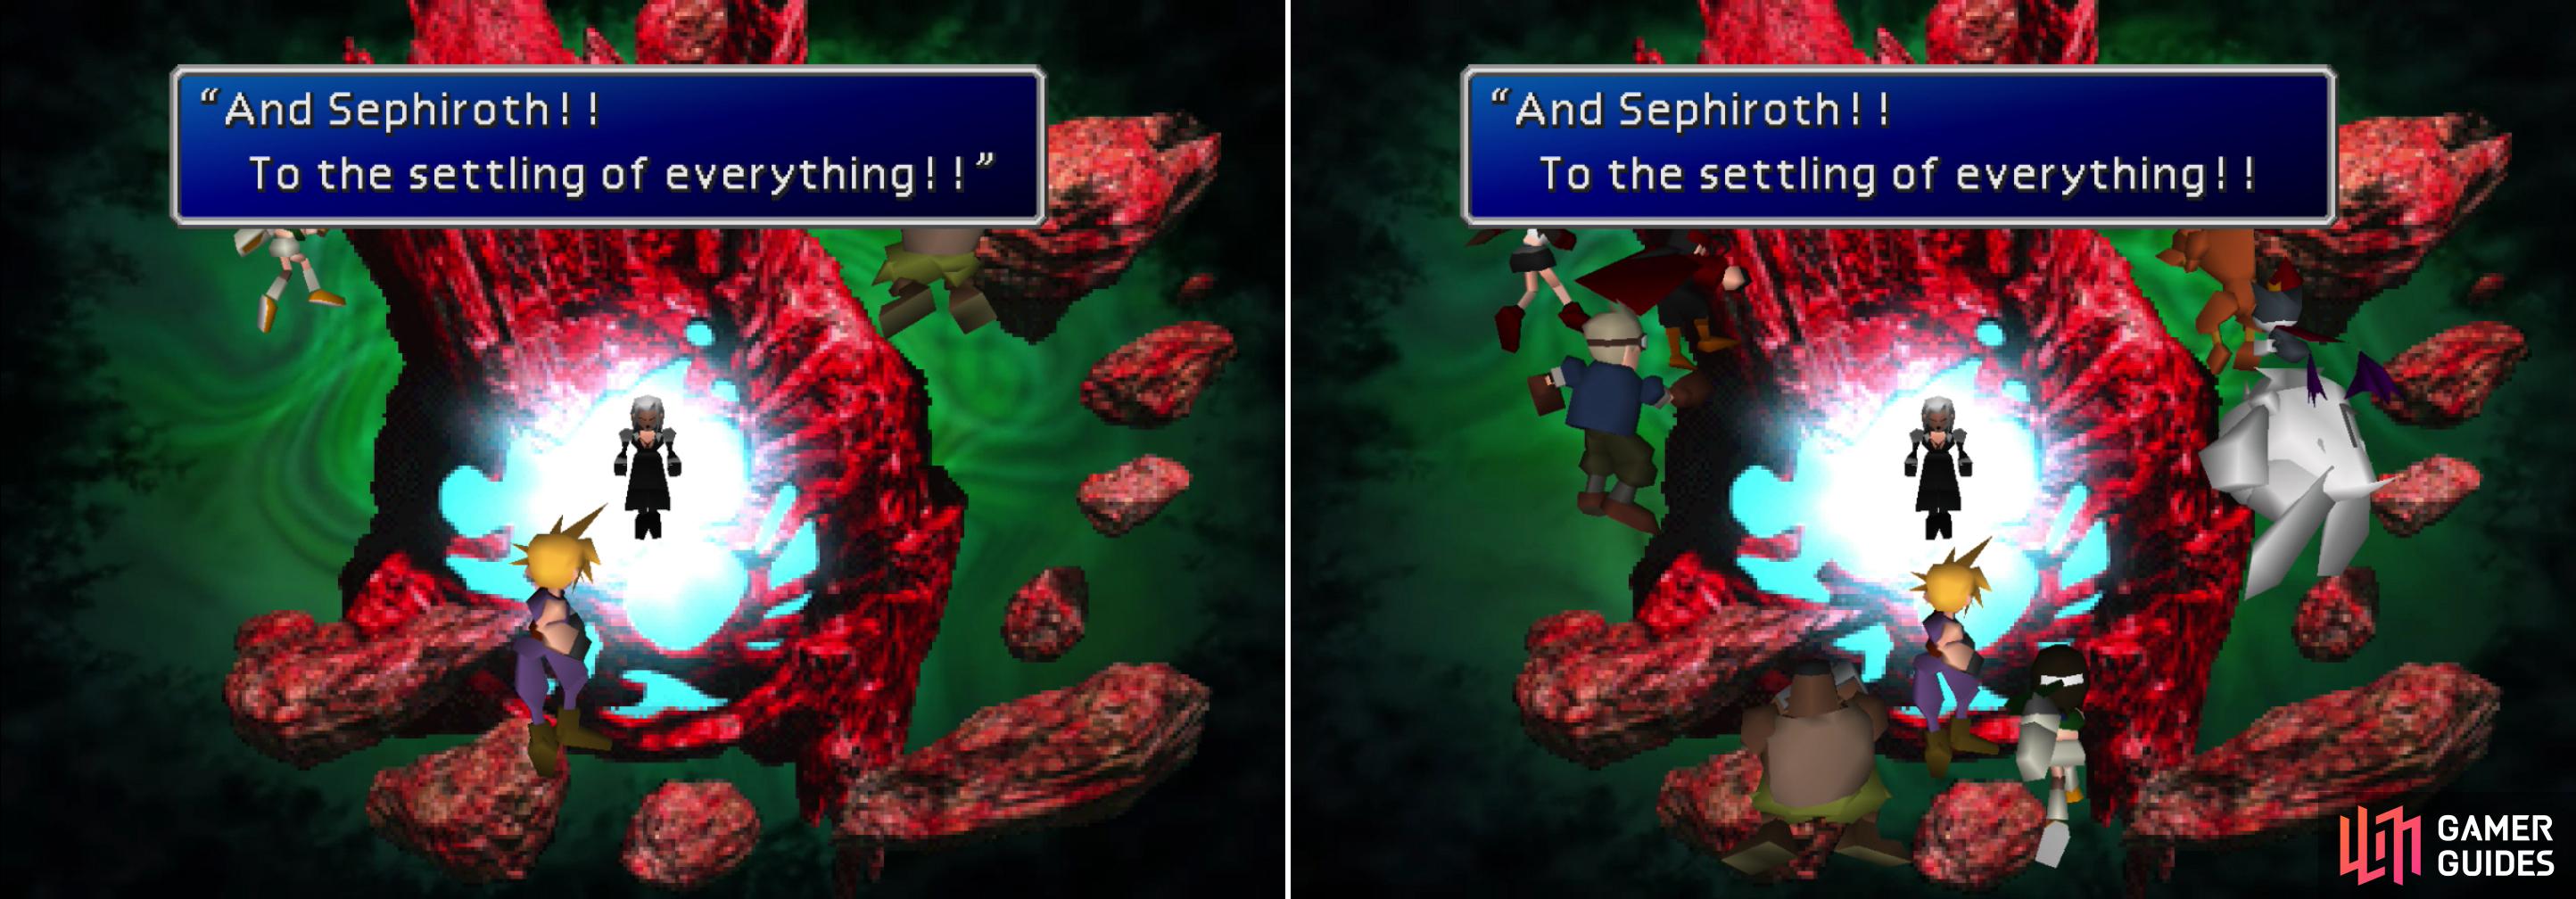 Depending on a number of factors, Sephiroth might expel all but three characters from the next fight (left), making it a simpler encounter. A stronger party will retain more characters, which must be split into three groups (right).